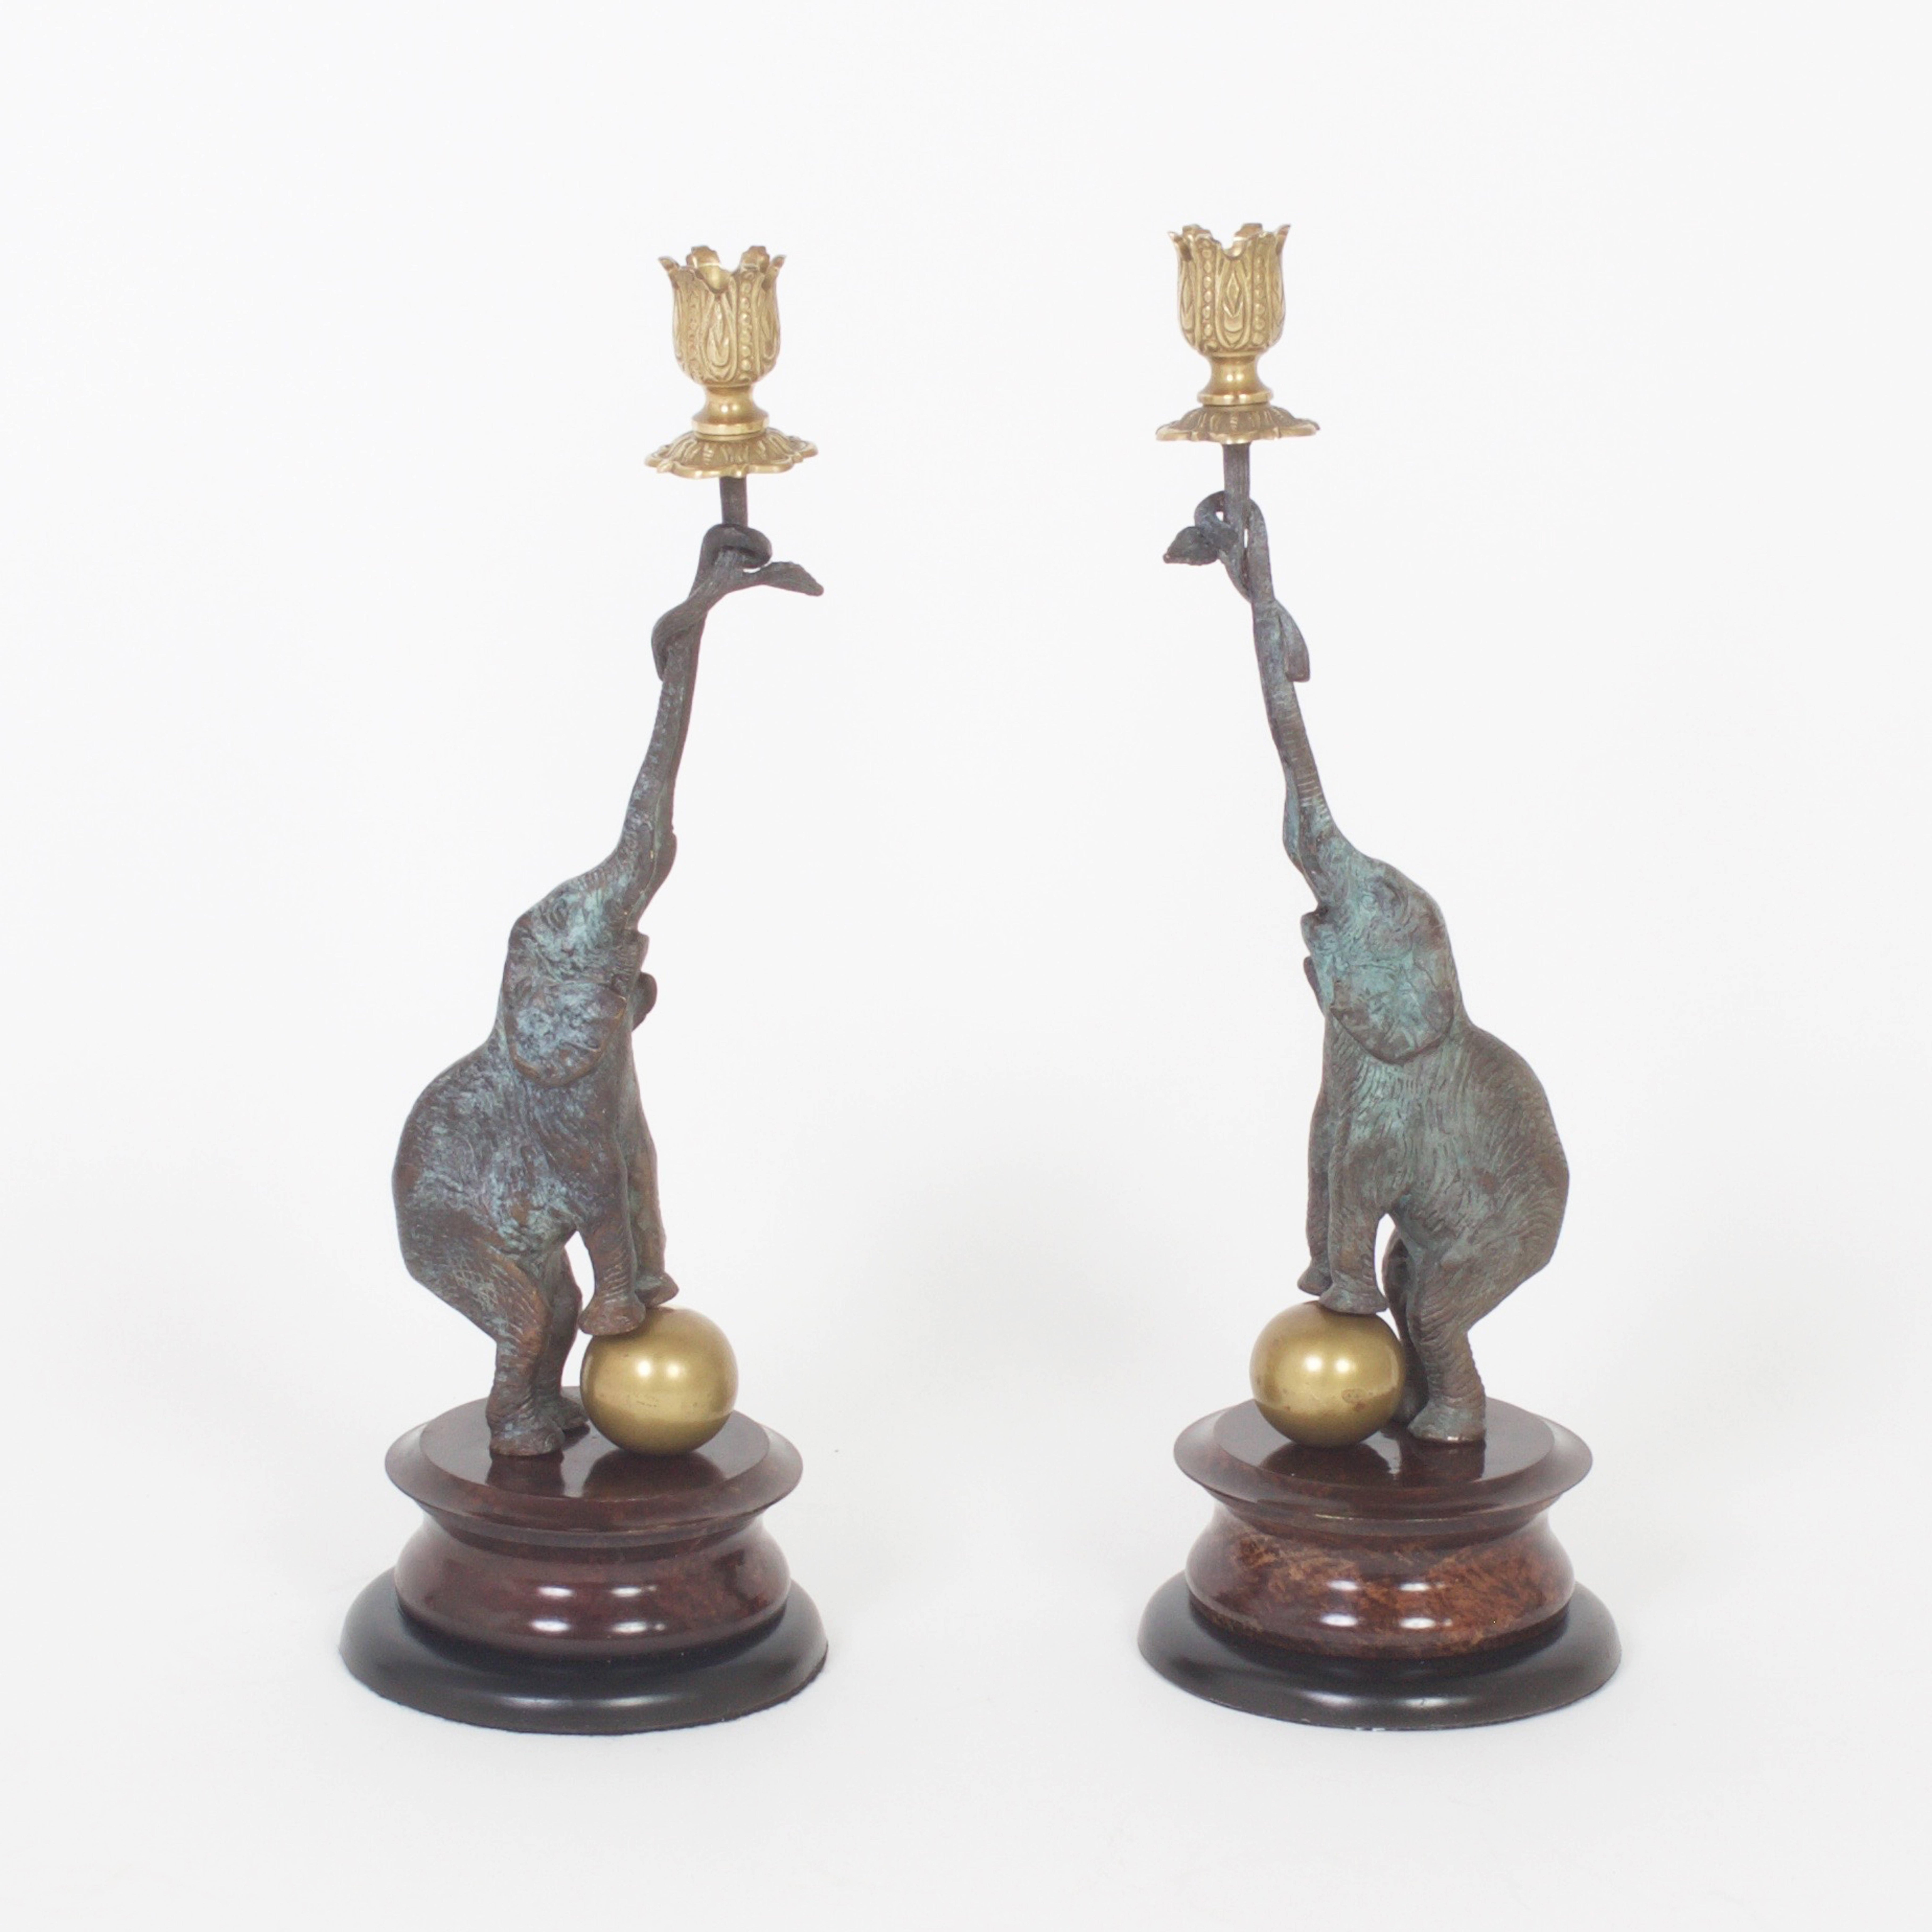 Sophisticated Mid-Century pair of elephant candleholders crafted with mixed metals. The candle cups are cast brass in a tulip shape held up by verdigris metal elephants balanced on a bronze ball. All presented on a faux marble iron base and ebonized